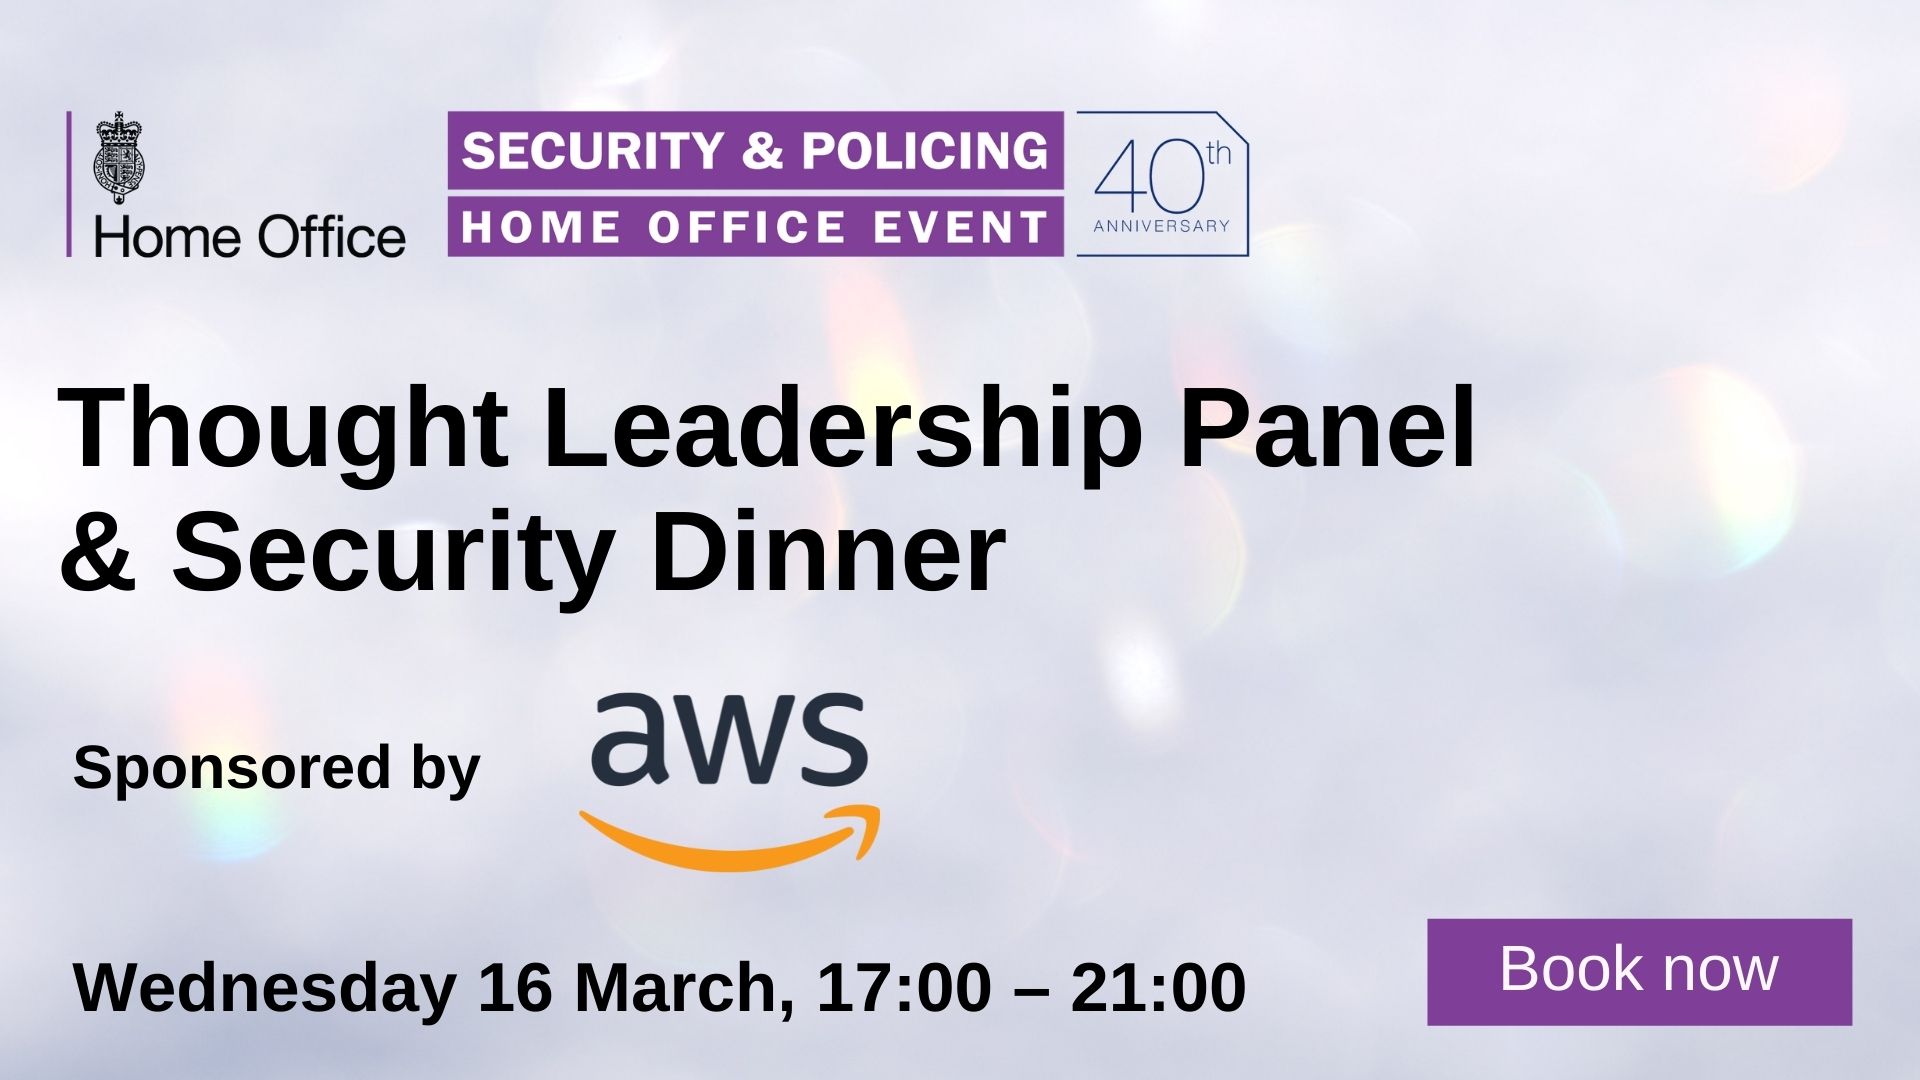 Security & Policing Thought Leadership Panel & Security Dinner sponsored by AWS (1)